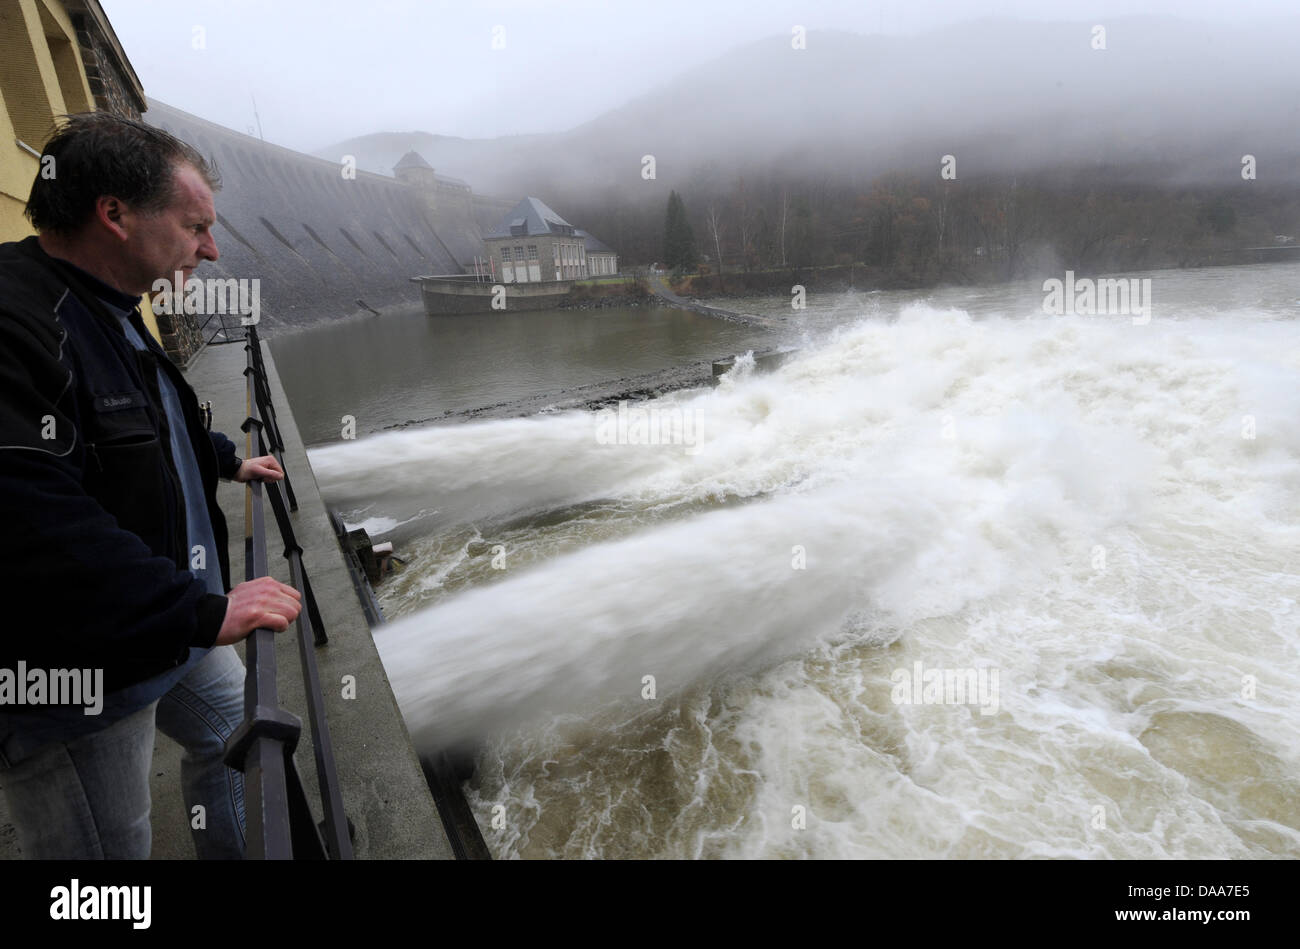 Dam operator Stephan Daude observes water streaming out of two scour outlets at the Edertal dam in Edertal-Hemfurth, Germany, 13 January 2011. The largest reservoir of Hesse is in danger of overrunning, due to heavy rainfall and thaw. Momentarily, water is let out of the reservior via scour outlets to create further storage space. Photo: Uwe Zucchi Stock Photo